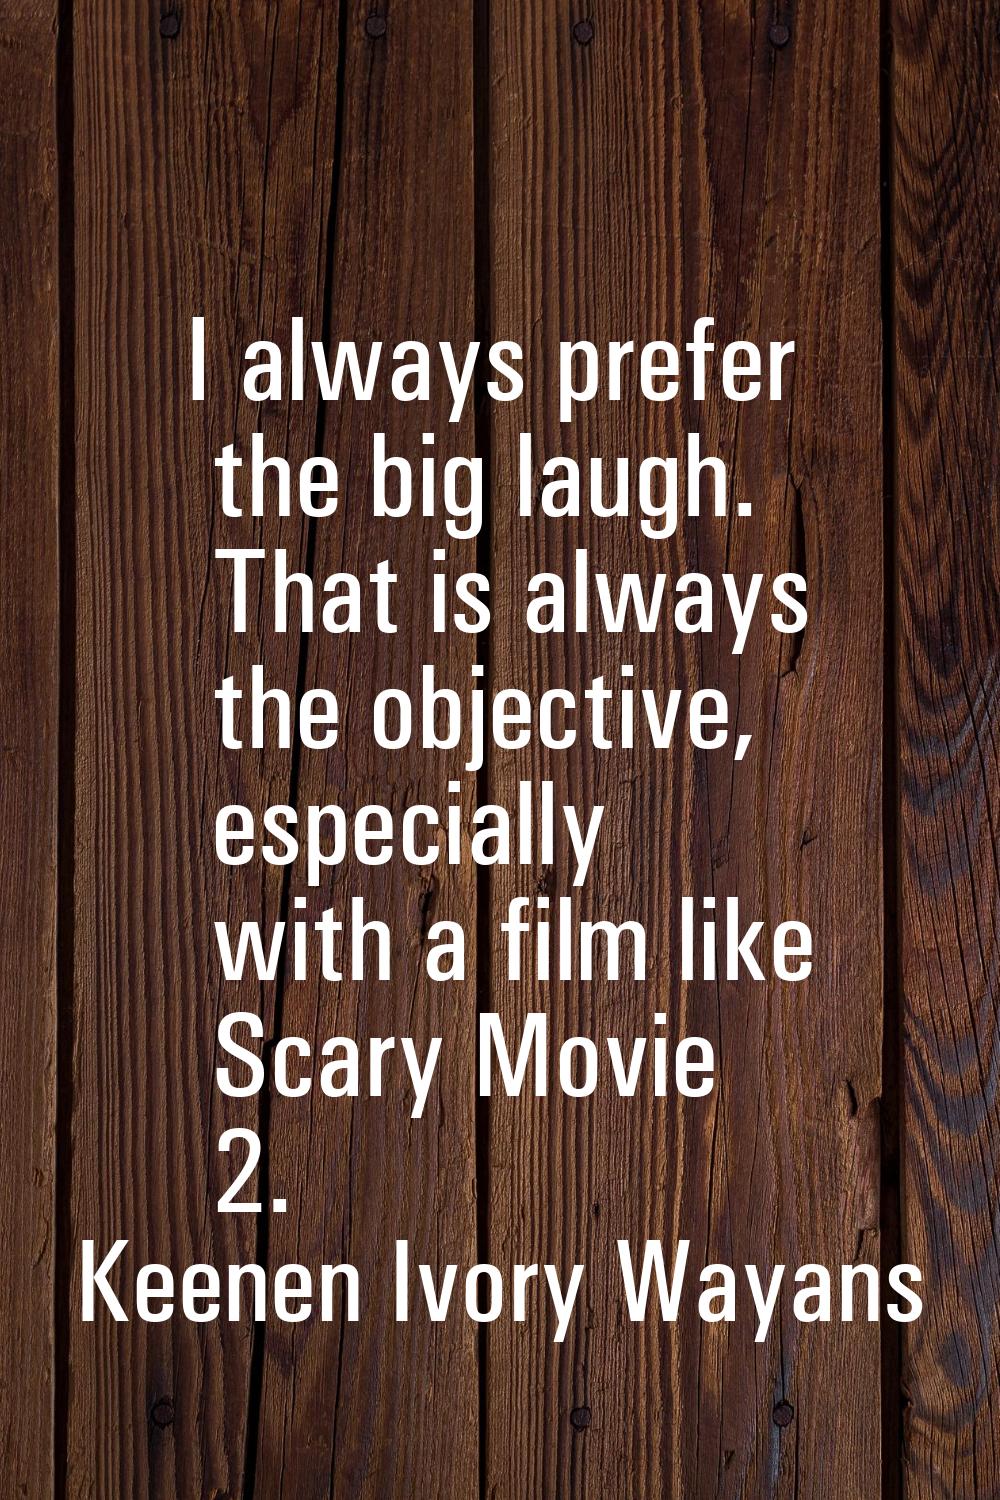 I always prefer the big laugh. That is always the objective, especially with a film like Scary Movi